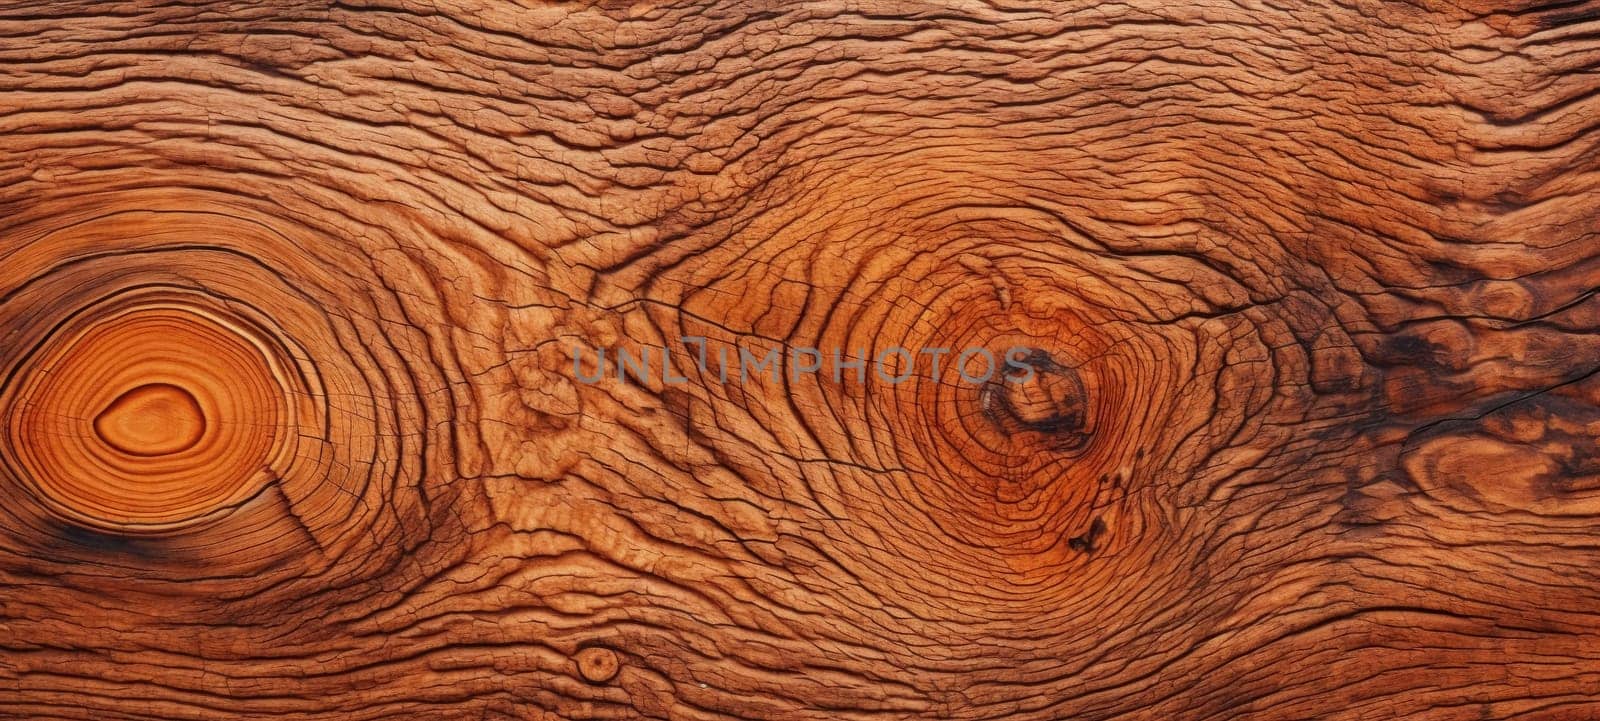 Detailed view of tree ring patterns and textures, showcasing the natural beauty and history of wood.